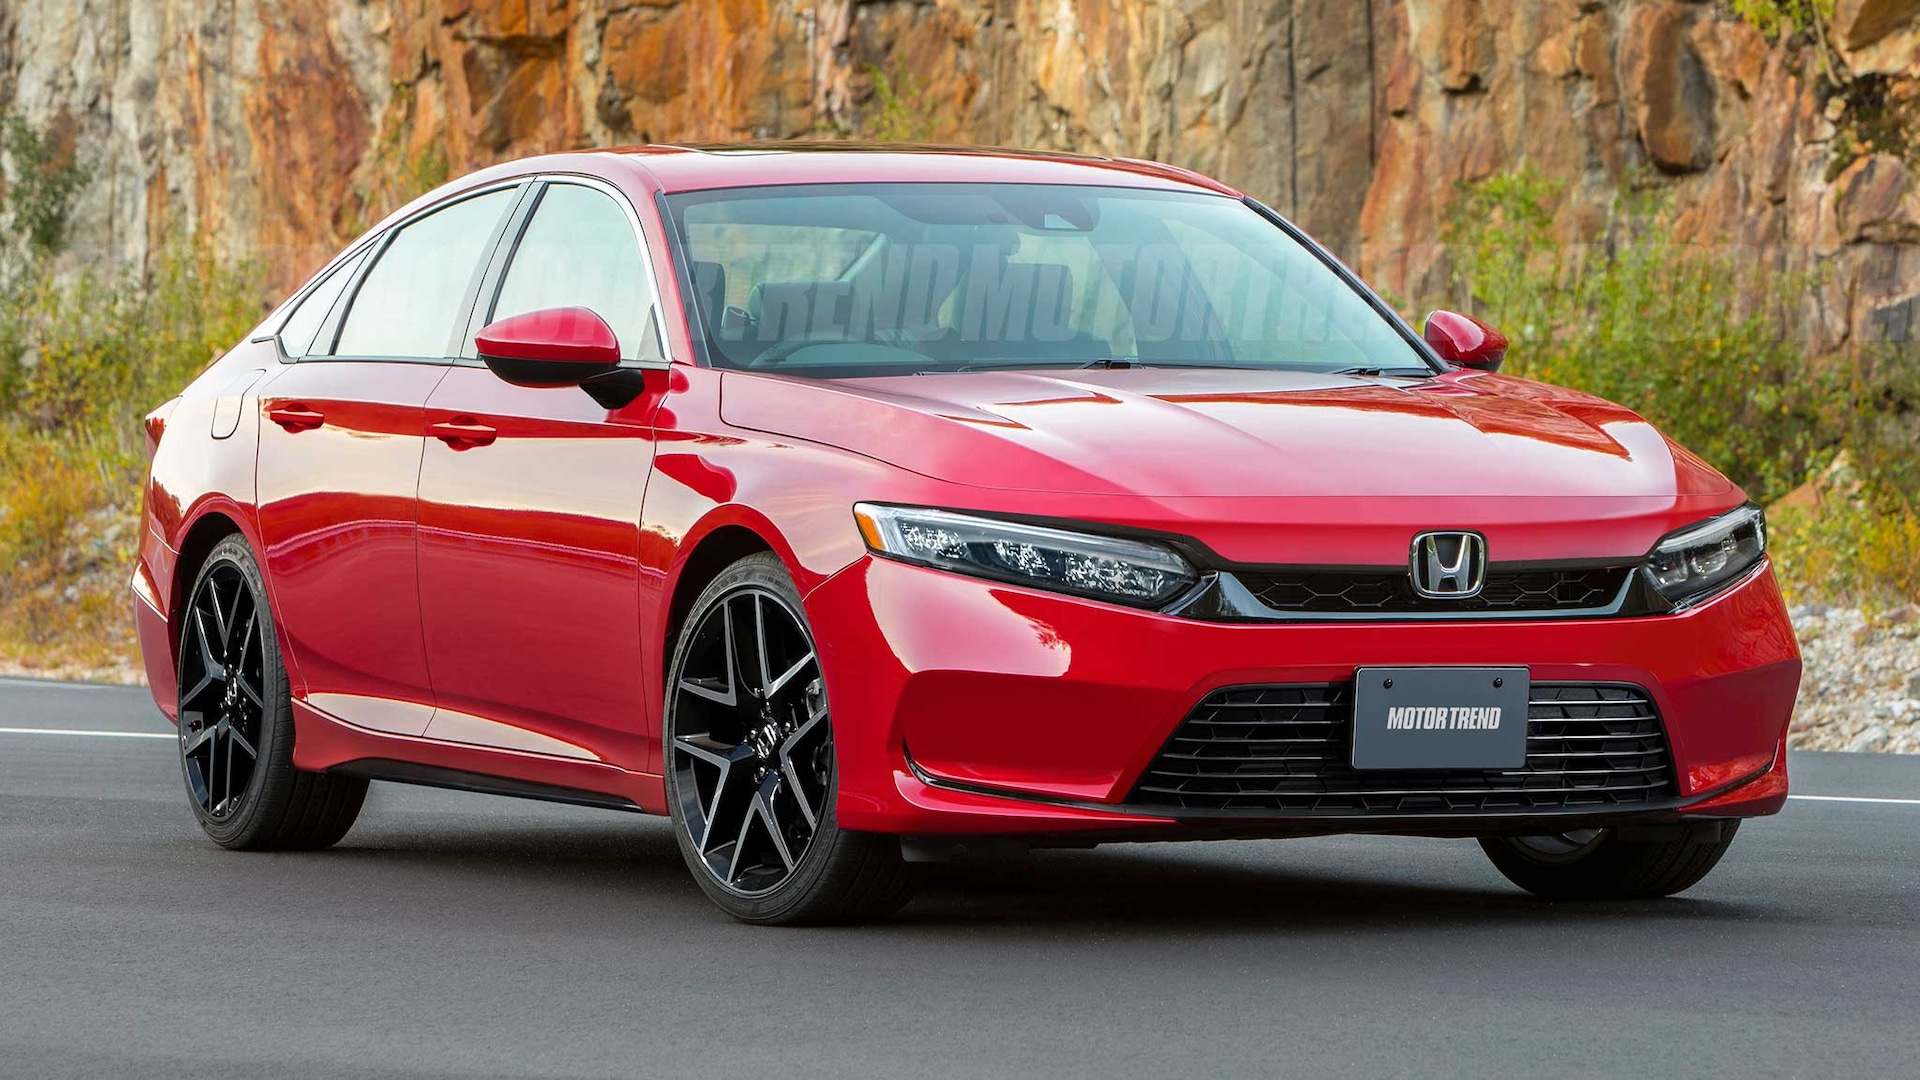 2023 Honda Accord: Everything We Know About The Next Generation Midsize Sedan